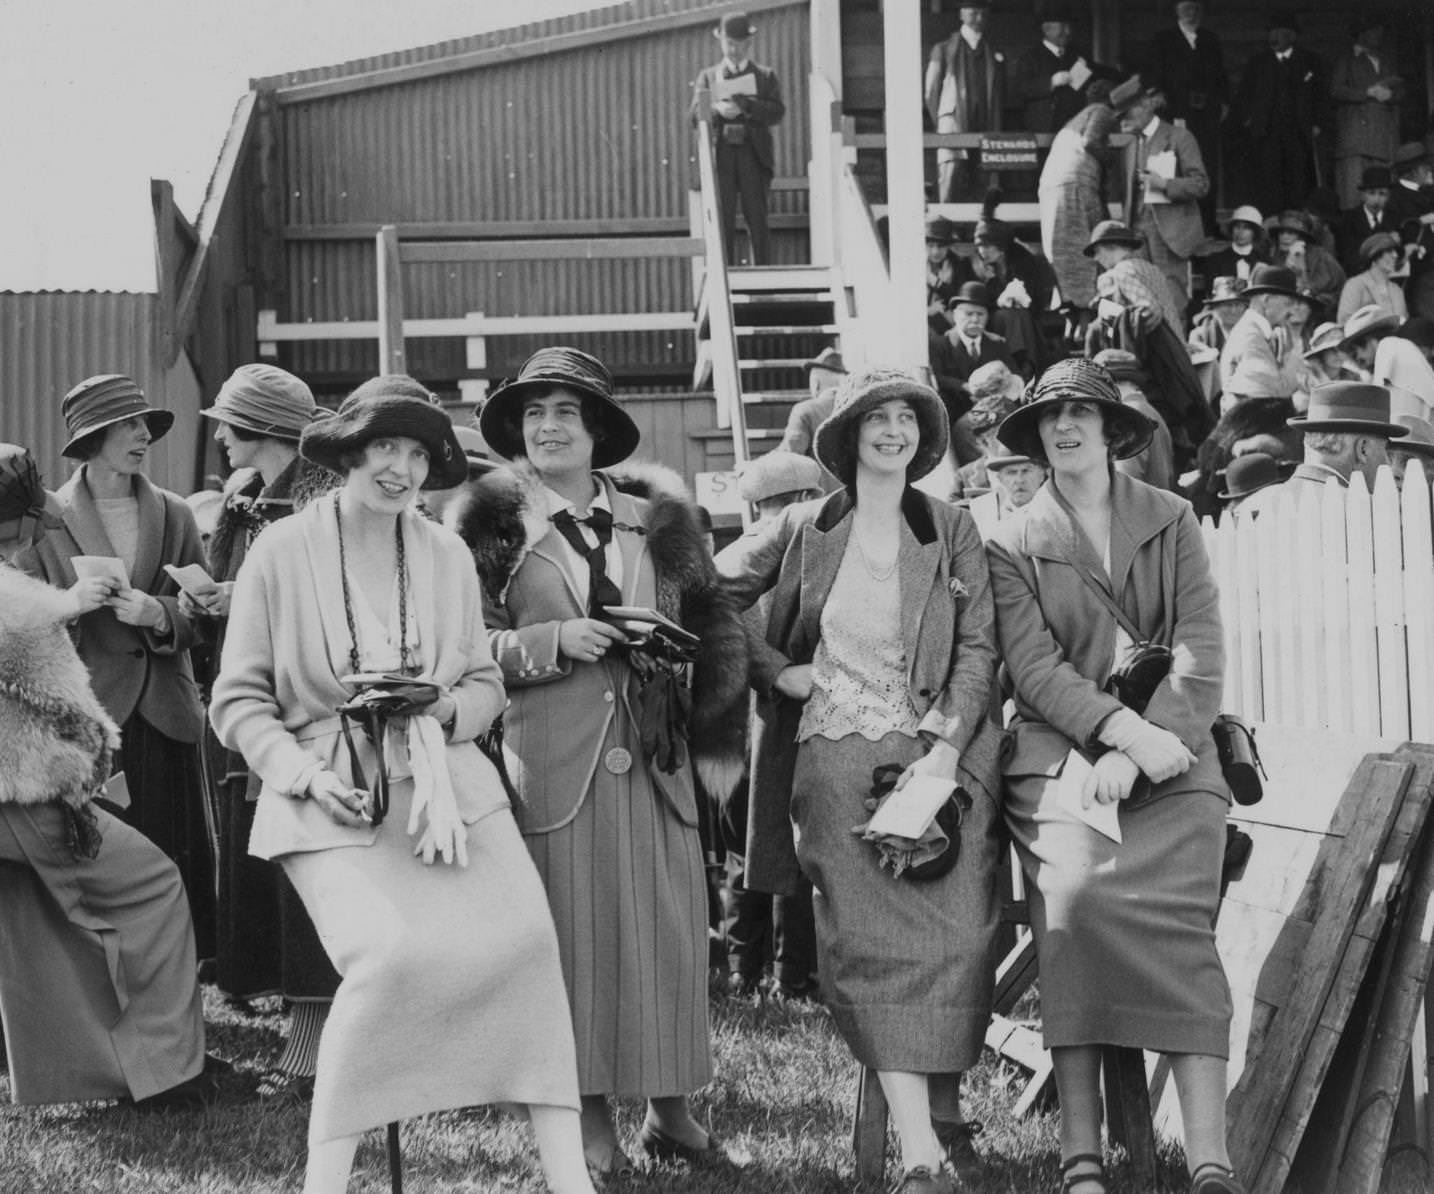 A group of women resting by a pavilion at Cowes Regatta, an annual maritime event held off the Isle of Wight, 1923